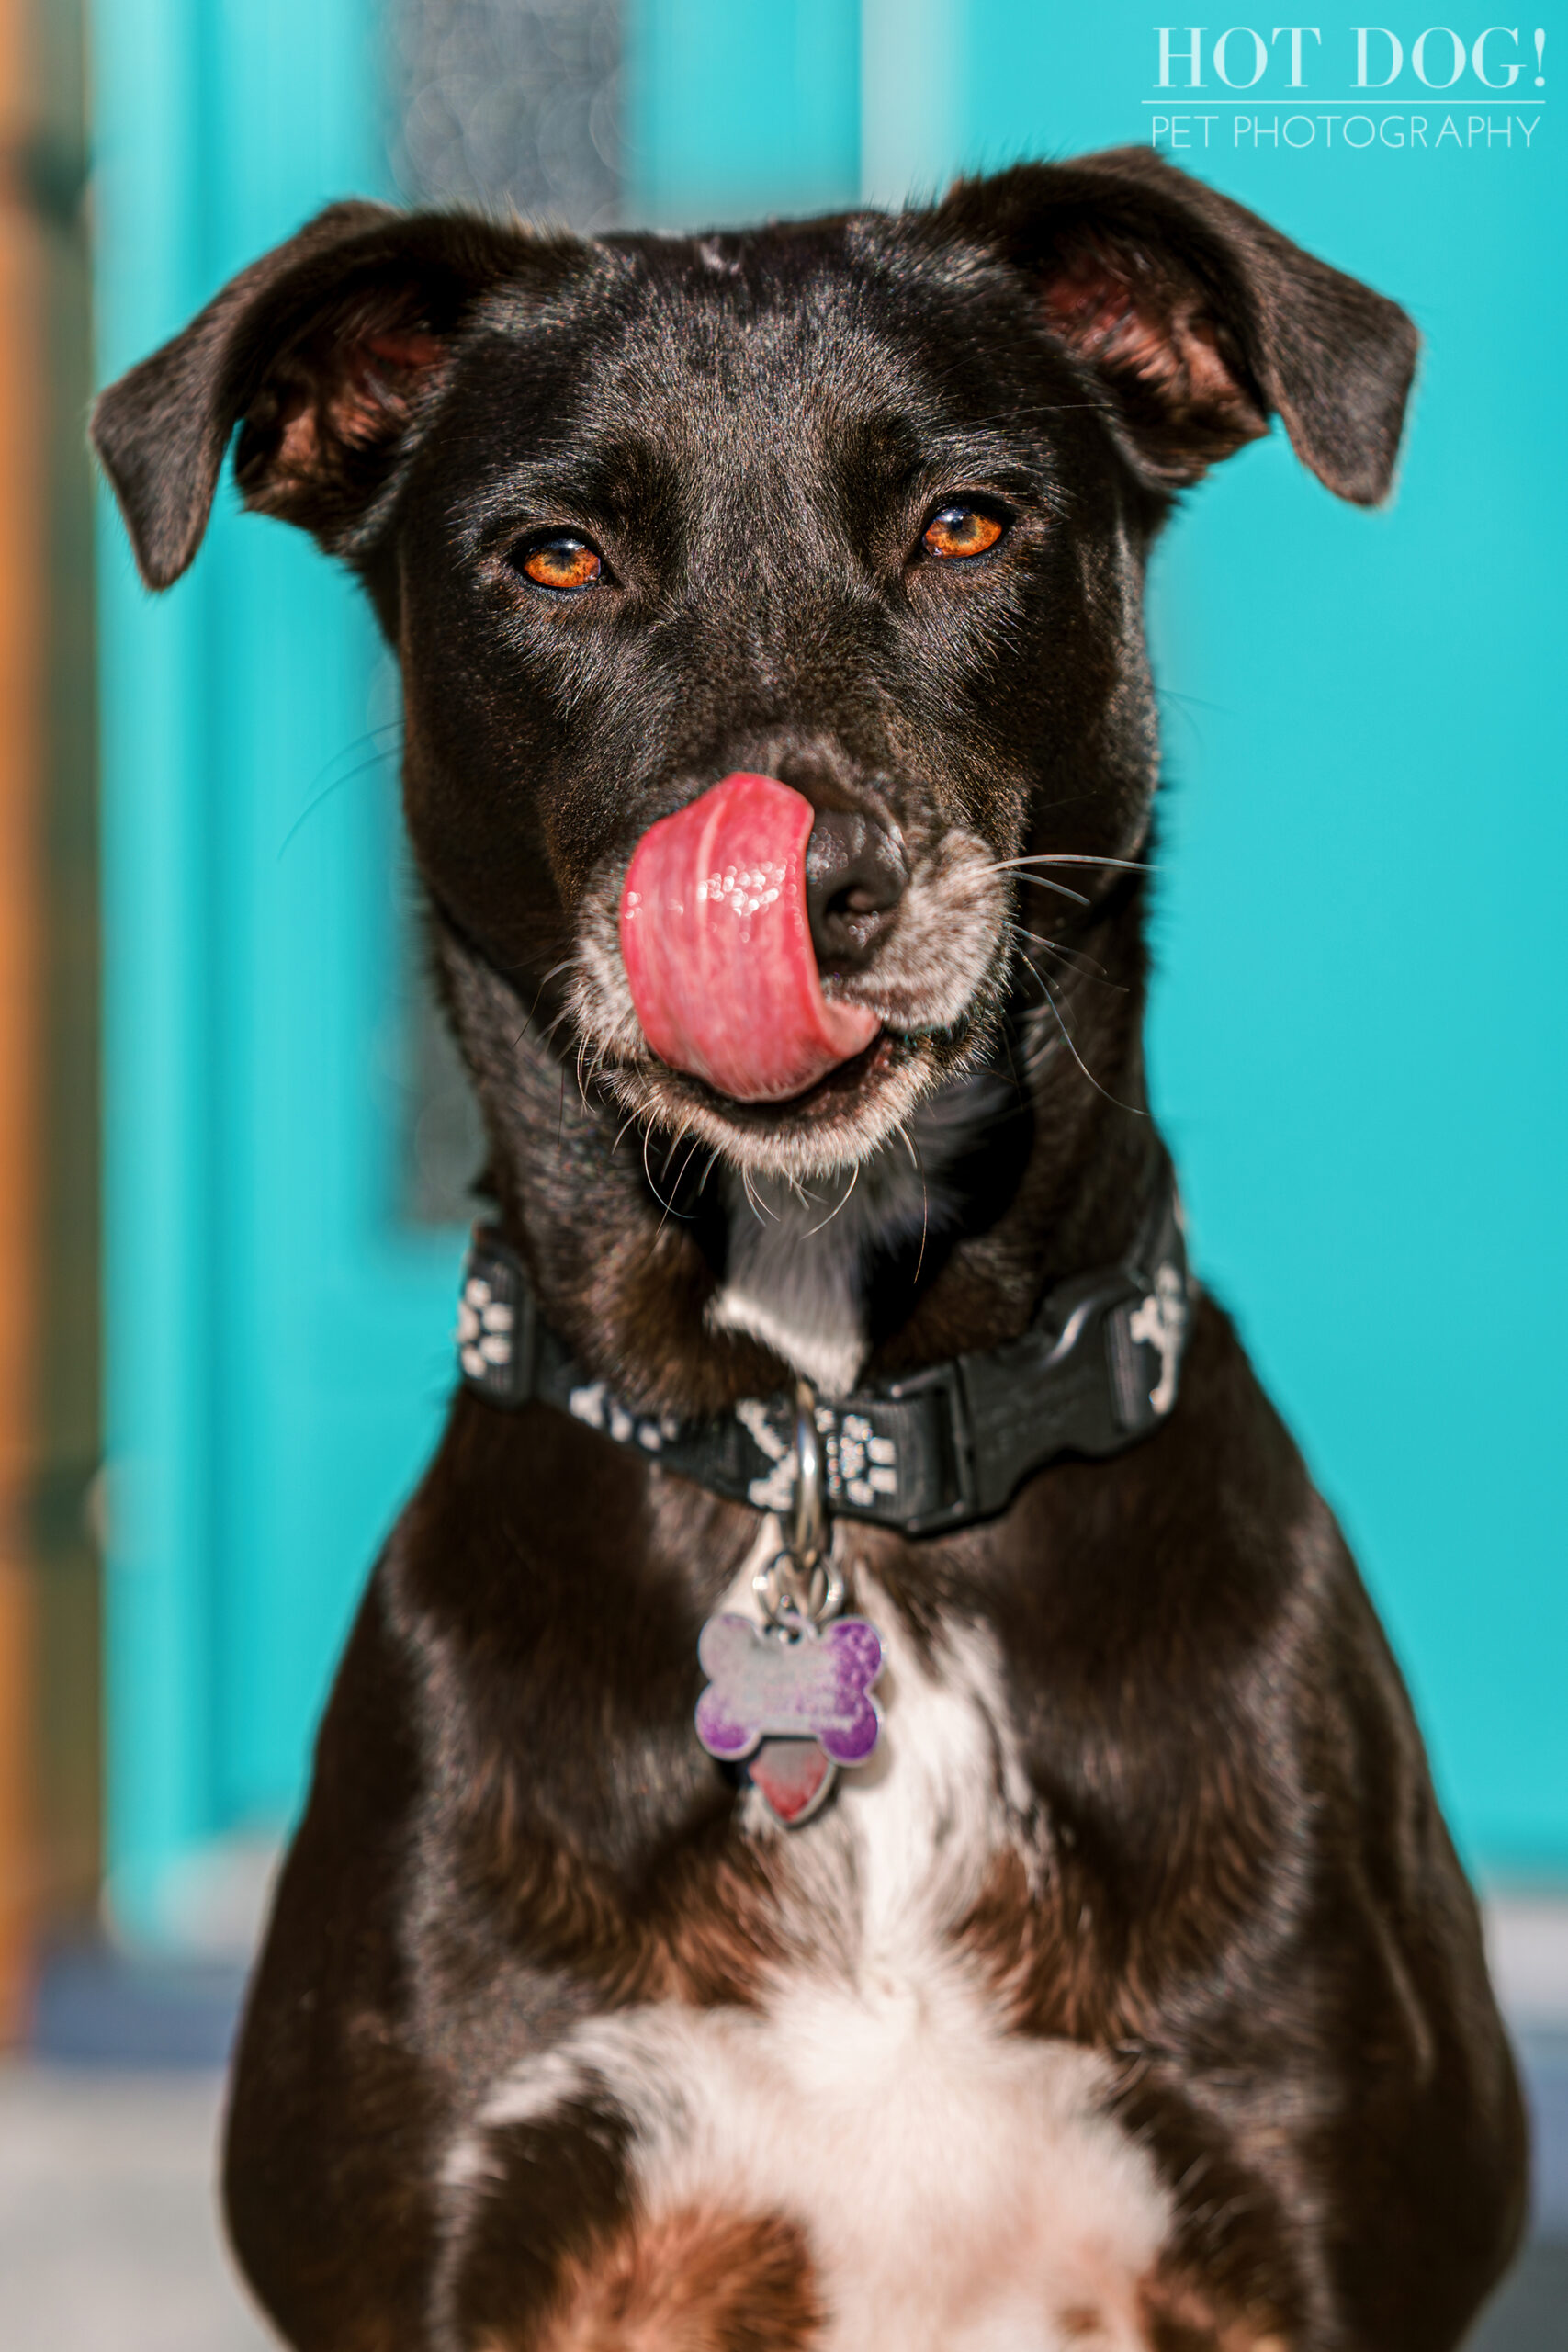 Hot Dog! Pet Photography creates stunning photos of mixed breed rescue dog Roxie in this professional pet photo session.